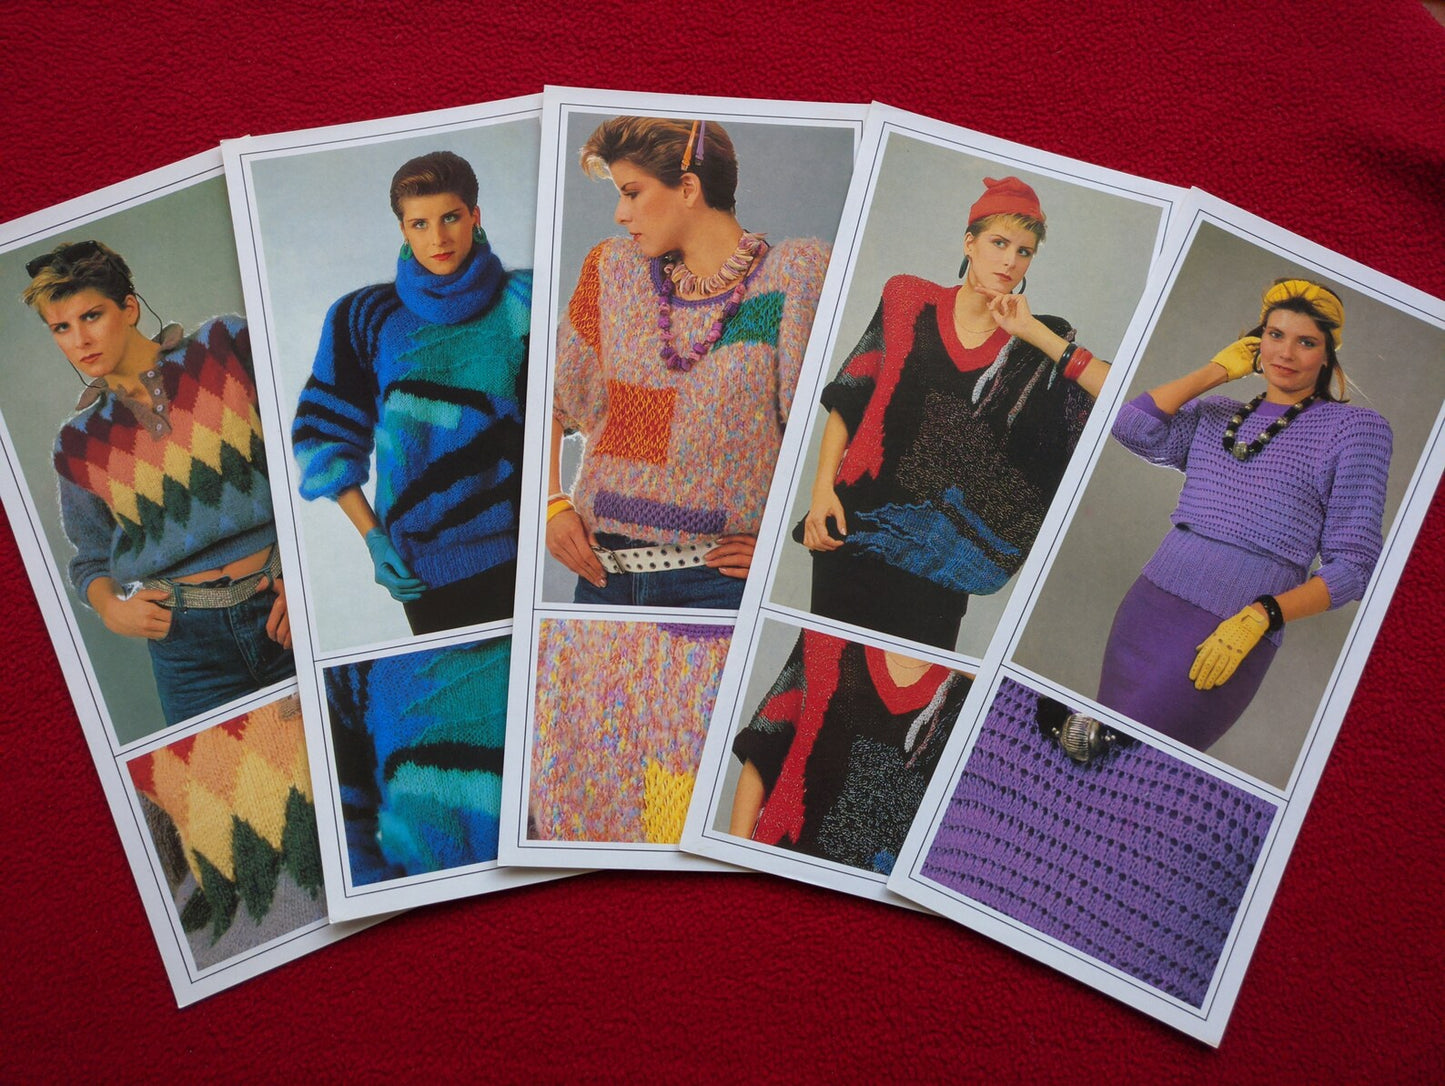 Vintage set of 24 Czechoslovakia Fashion Postcards With Knitting Patterns from 1980s - 24 knitting patterns and ideas - Tutorial book included.